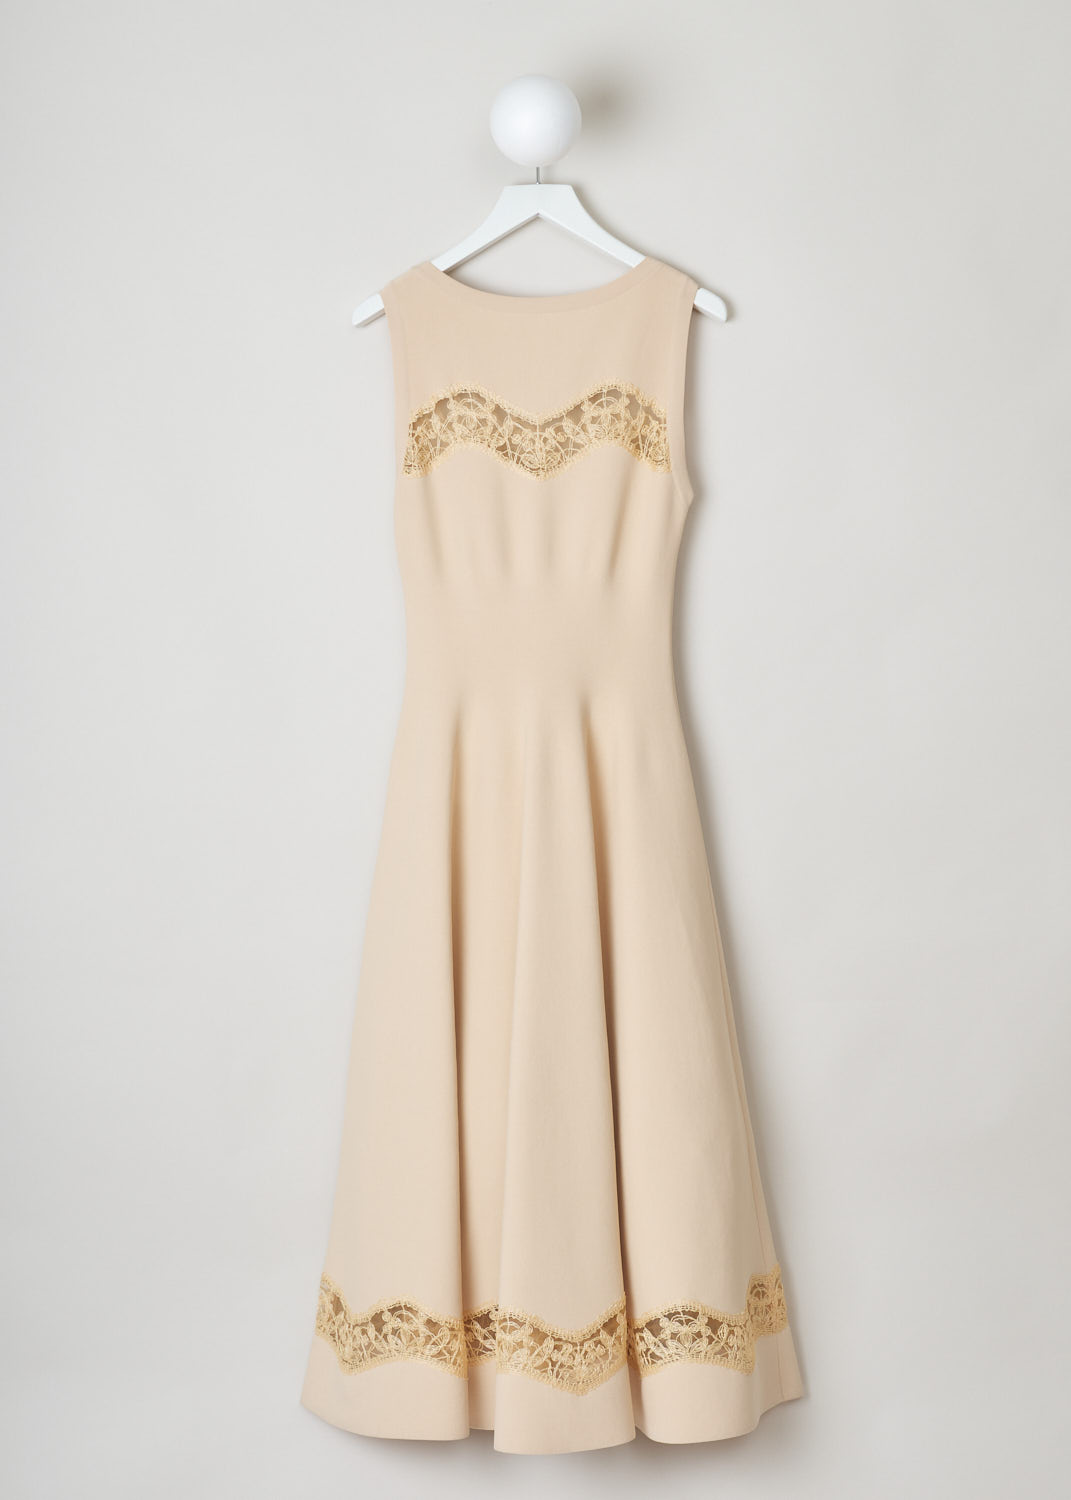 Alaïa, Max length dress with embroidered detailing, 9E9RM34LM473_robe_SM_raphia_dentelle_C120, beige, back, Max length dress featuring a fitted bodice and a skirt with flowing pleats. This model comes with round neckline and no sleeves. Lovely embroidery decorates the chest and bottom of the dress. Fastening option on this model can be found on the left side of the dress.  